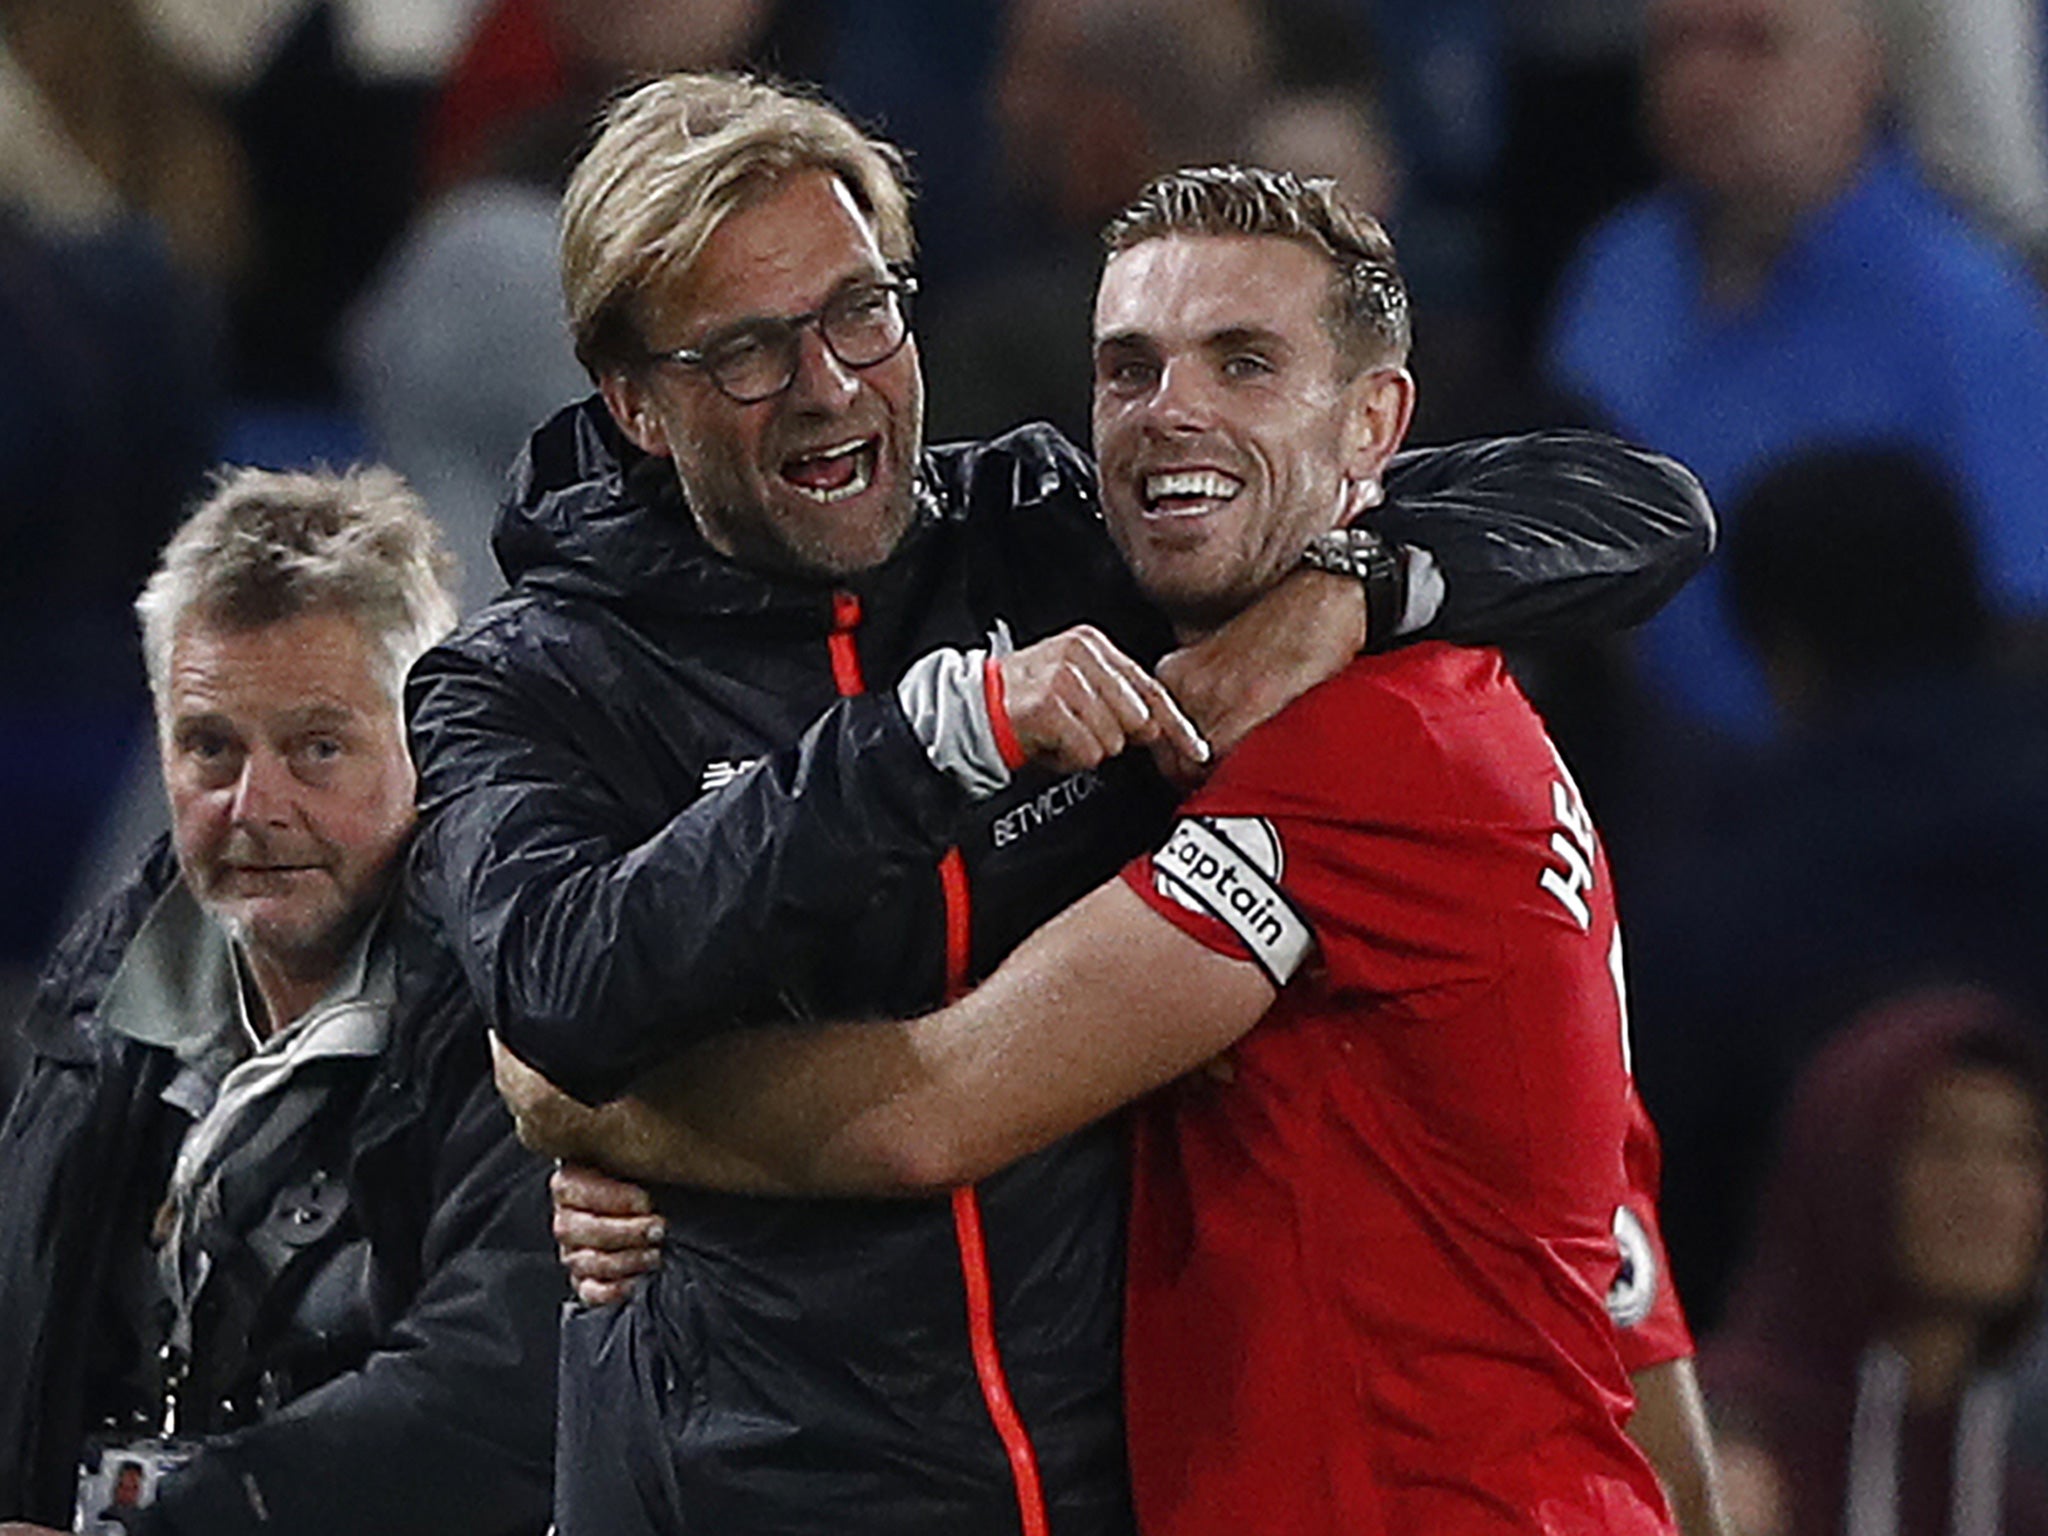 Klopp embraces Henderson after Liverpool's win at Chelsea